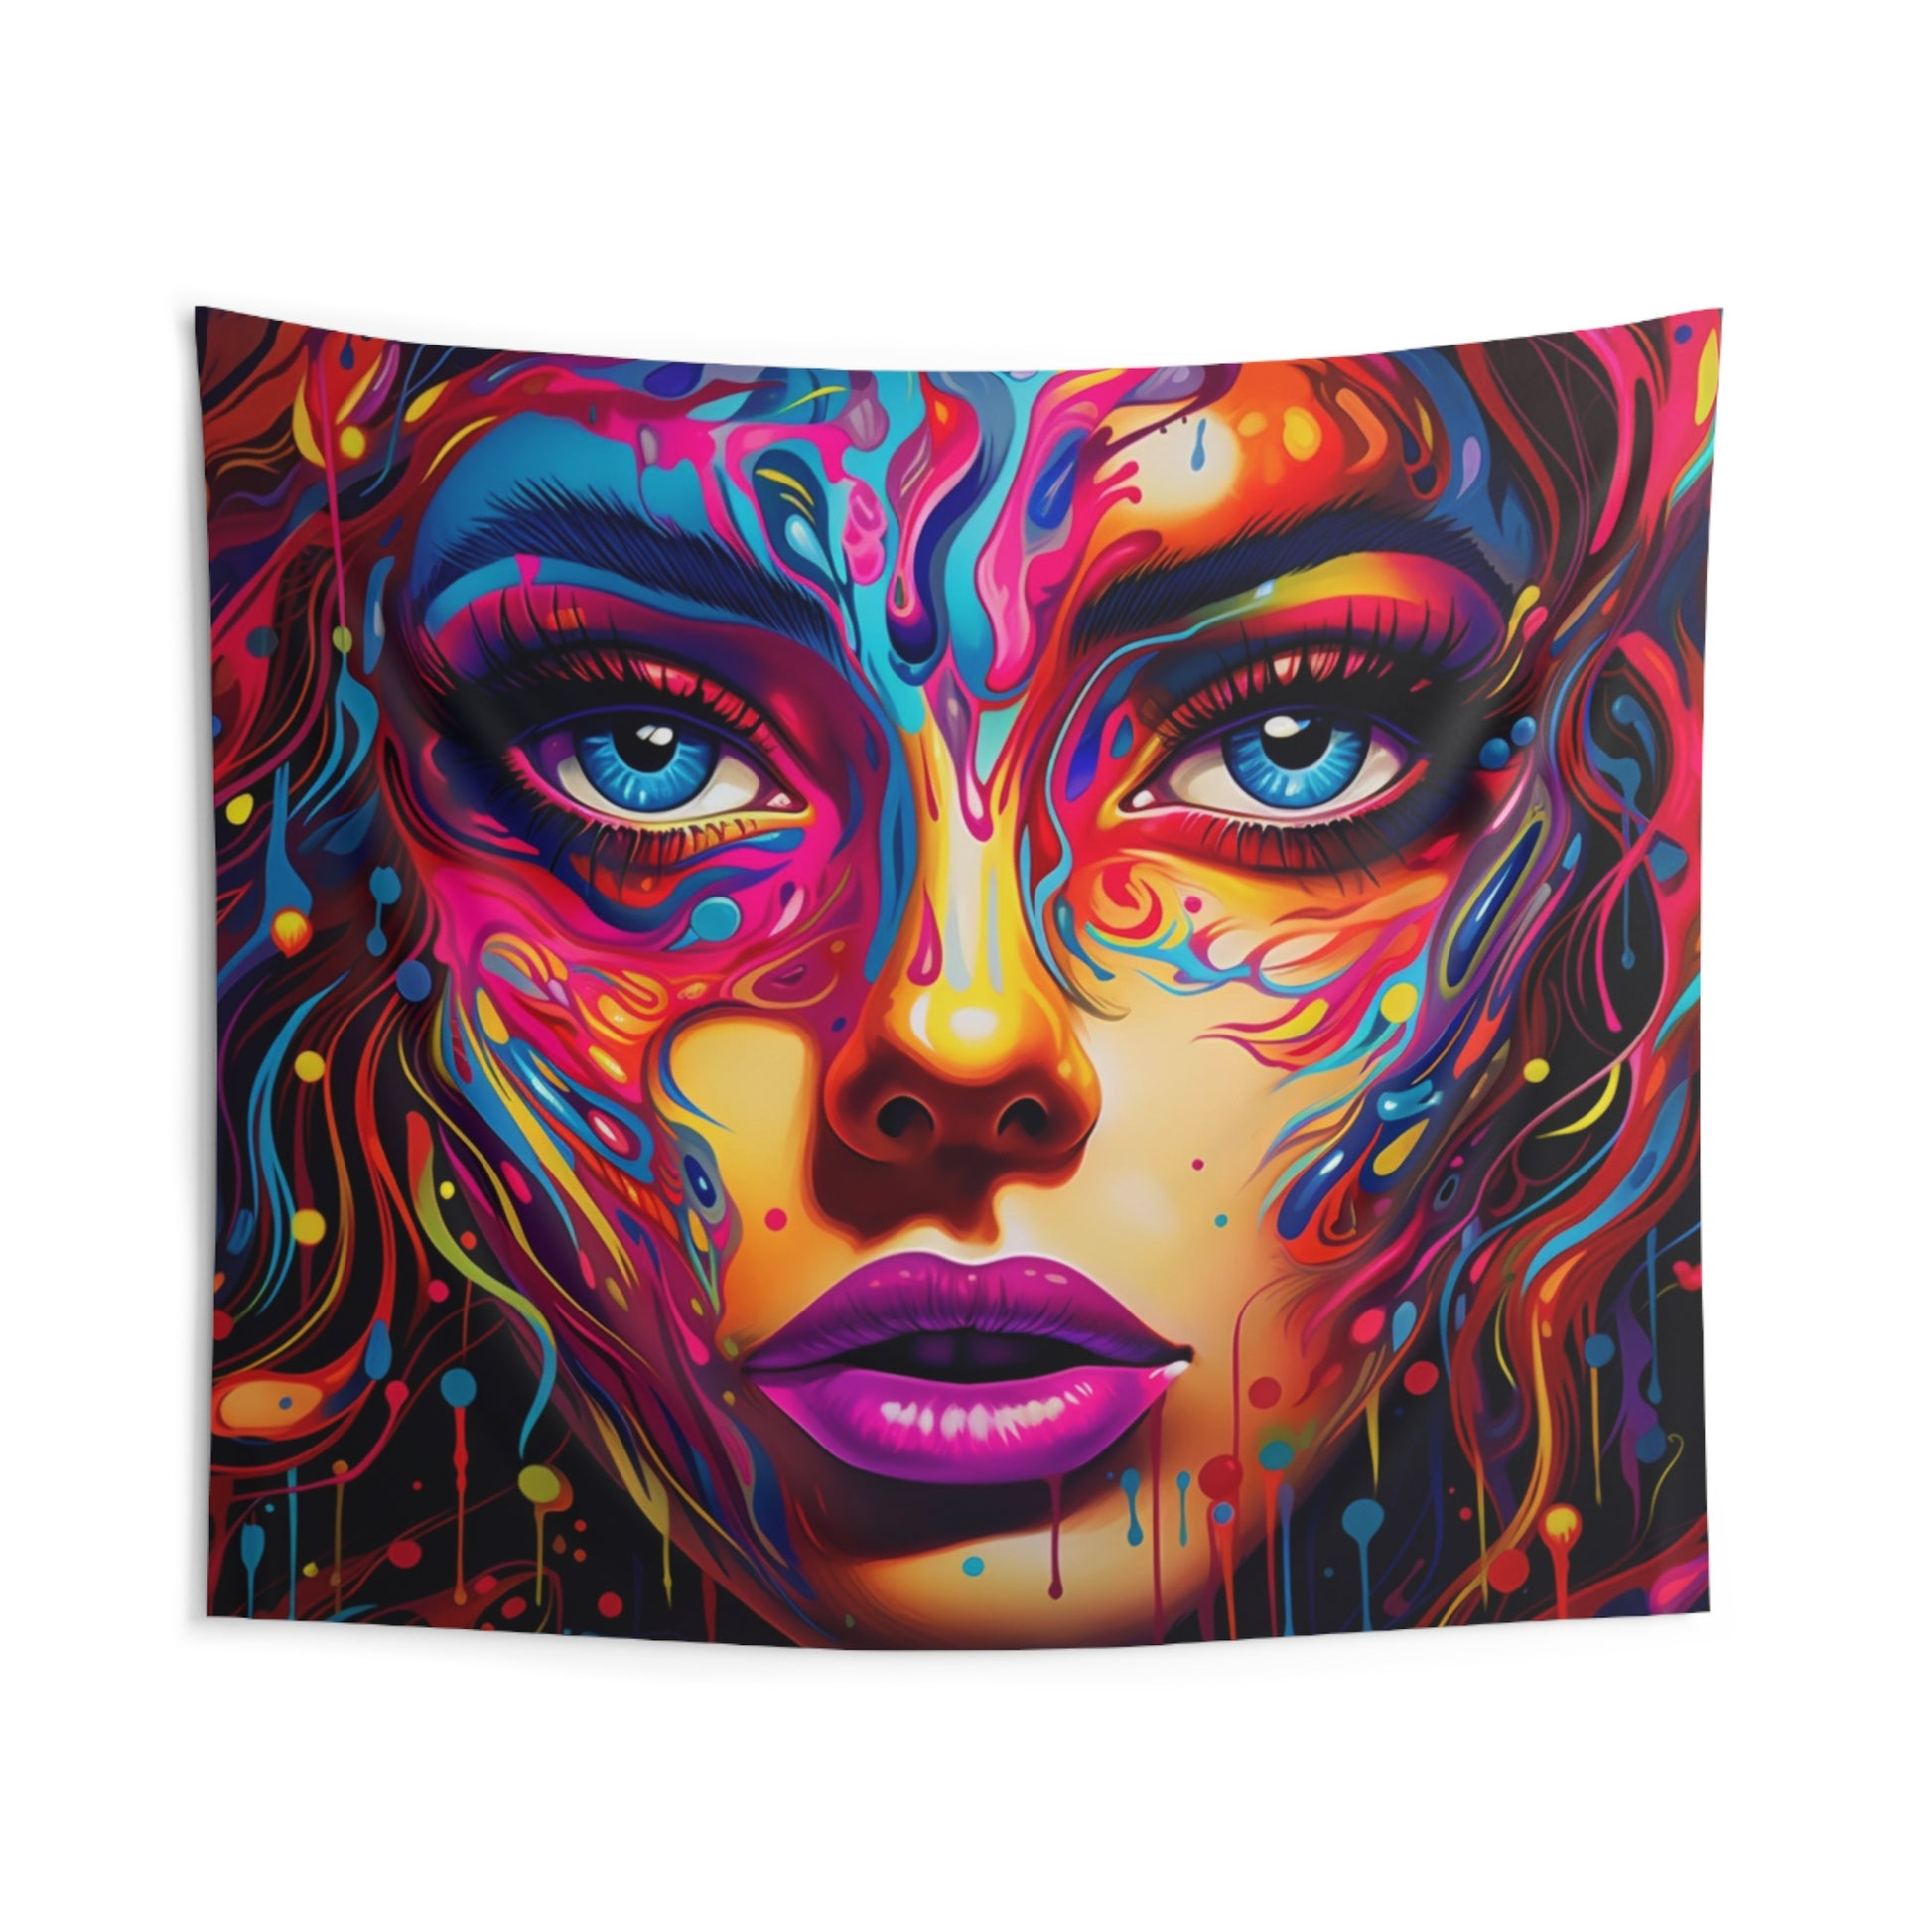 Funky Tapestry, Colorful Drip Paint Women Wall Art Hanging Cool Unique Landscape Aesthetic Large Small Decor Bedroom College Dorm Room Starcove Fashion